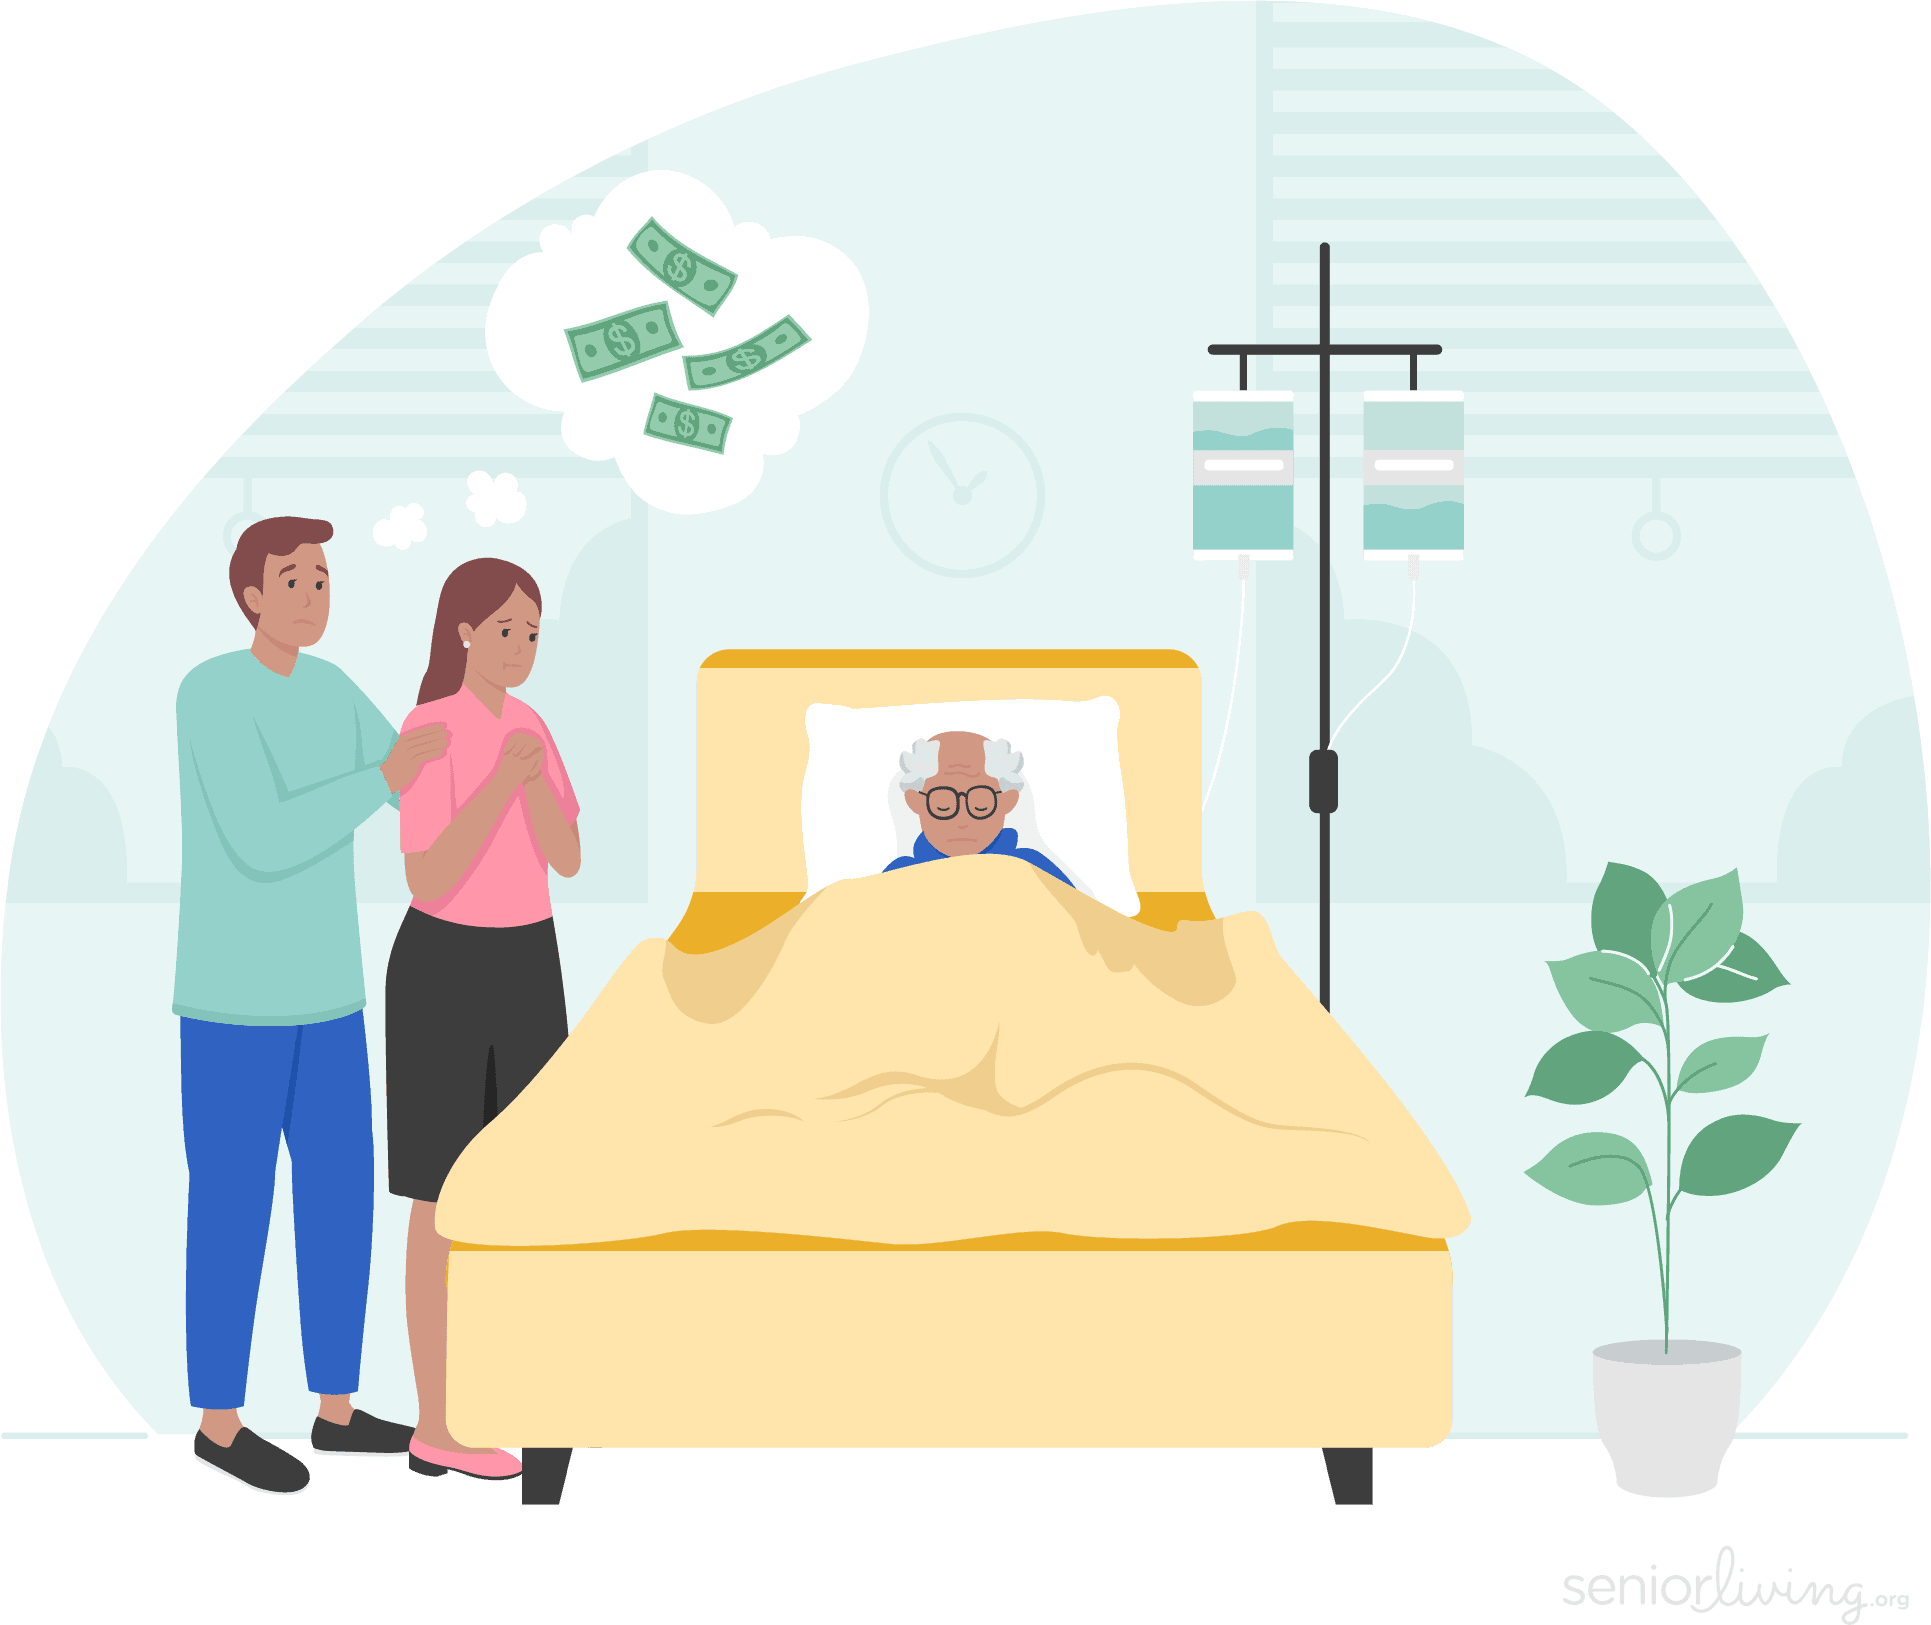 How much does hospice cost?